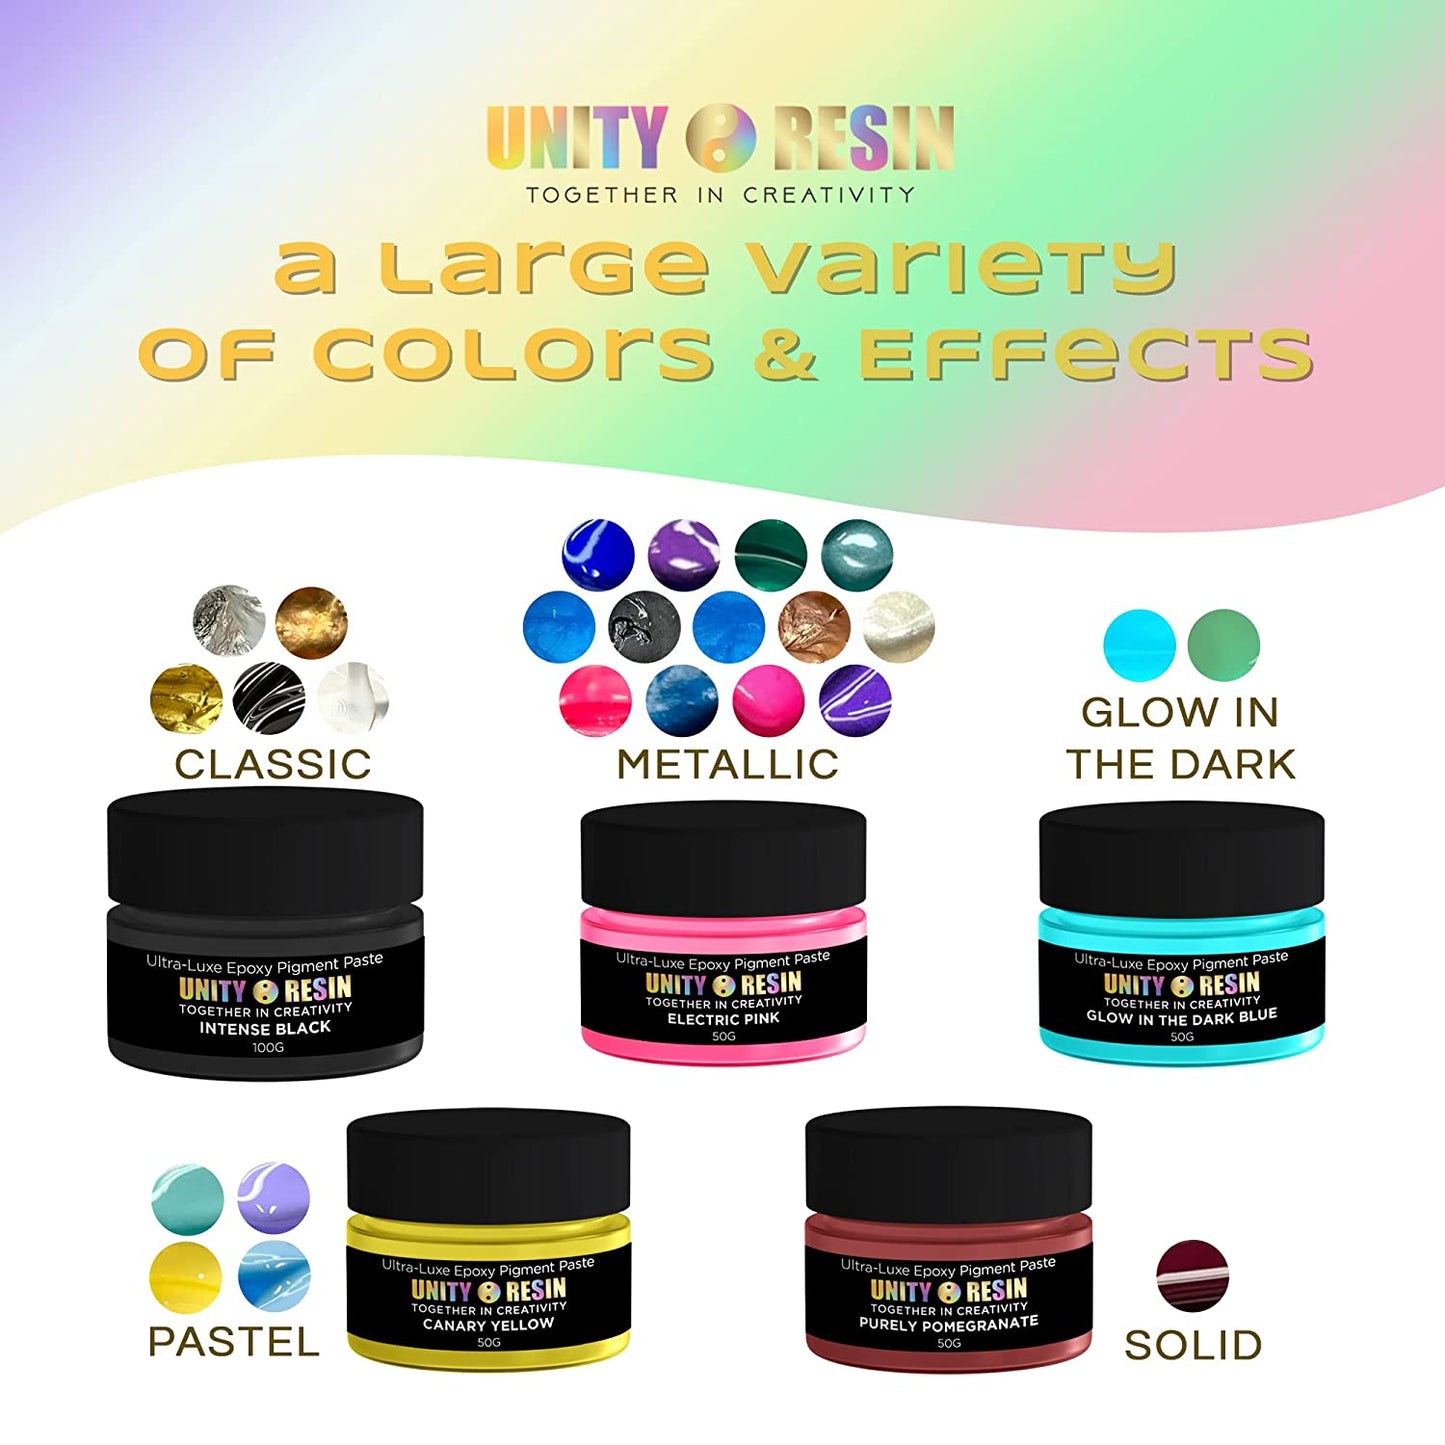 SPECIAL LIMITED EDITION Resin Ocean Art Bundle Package! -Includes 1 Gallon Kit of Unity Resin Premium Artist Epoxy & 4 Ultra Luxe Pigments